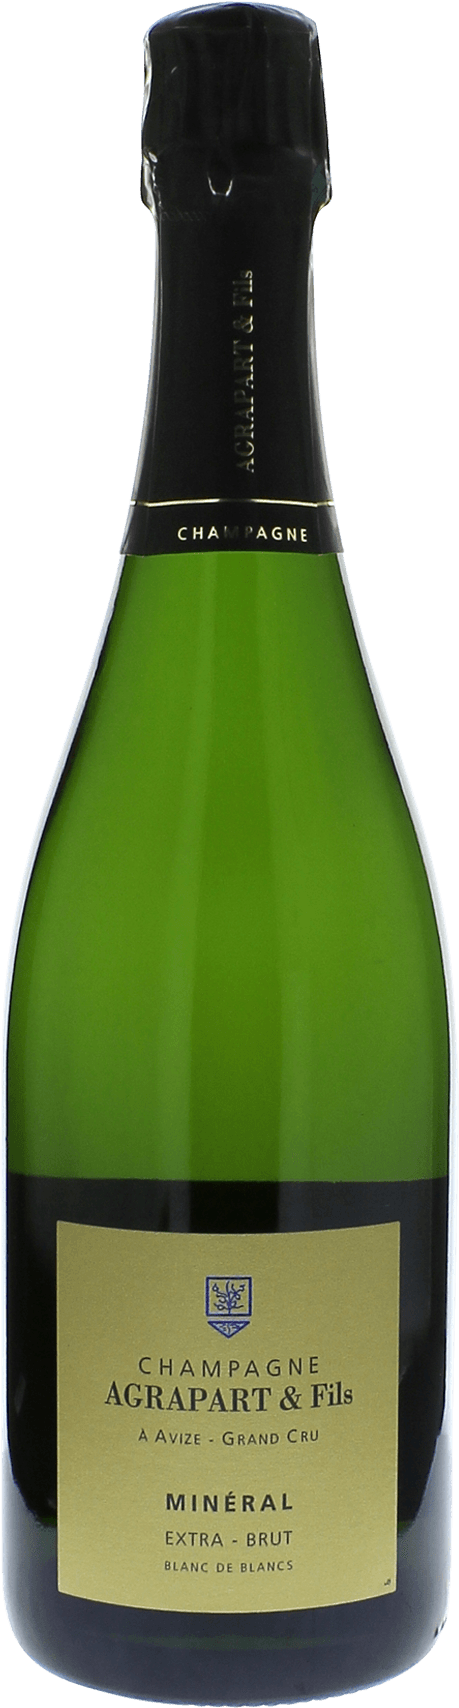 Agrapart  mineral extra brut blanc de blancs 2008  Agrapart, Champagne